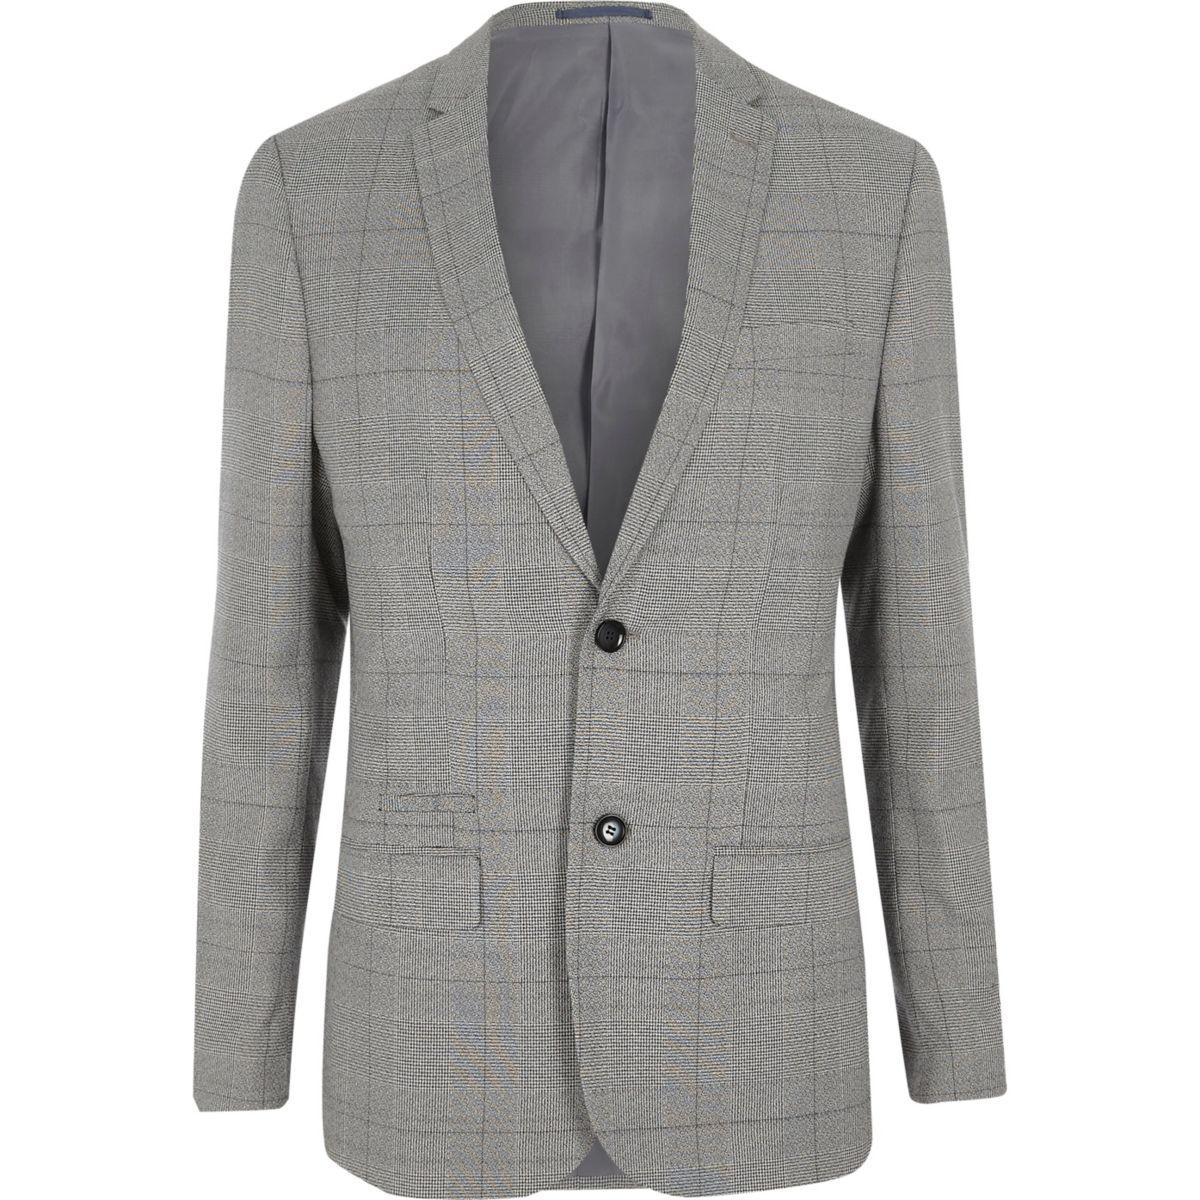 Lyst - River island Grey Check Slim Fit Suit Jacket Grey Check Slim Fit ...